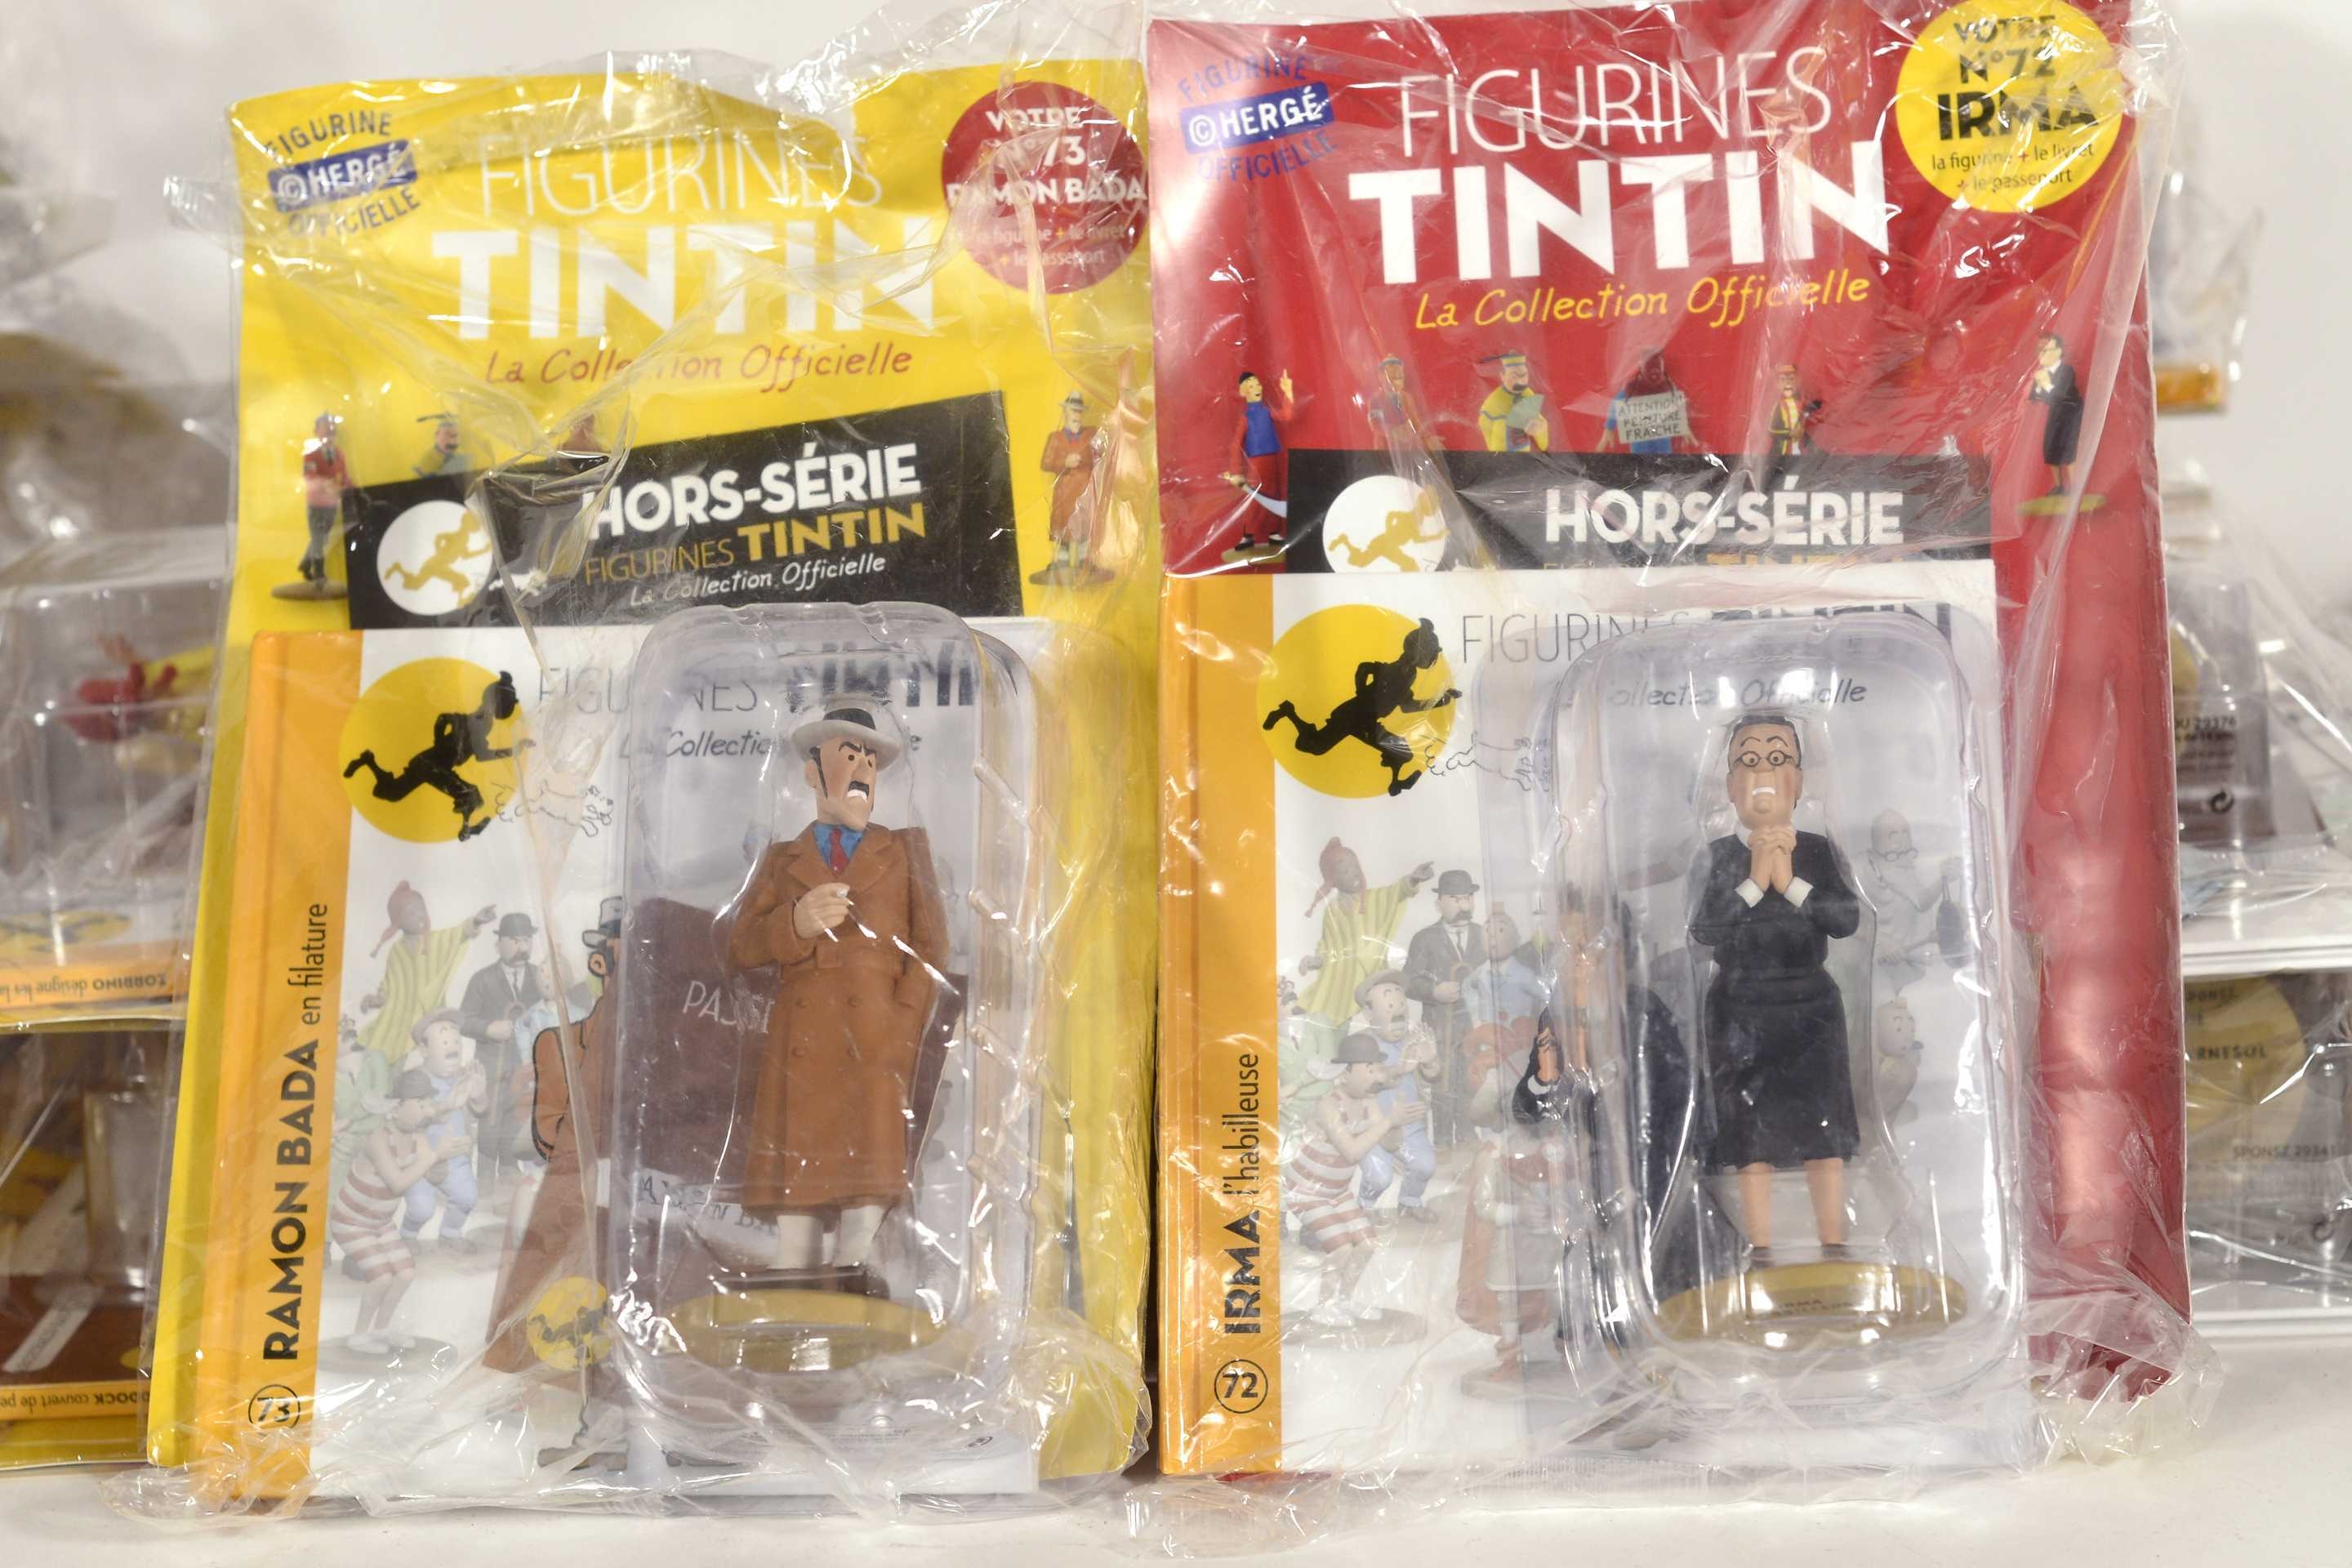 TINTIN. Figurines Tintin - La collection officielle. Tome 001 : Tintin en  trench-coat